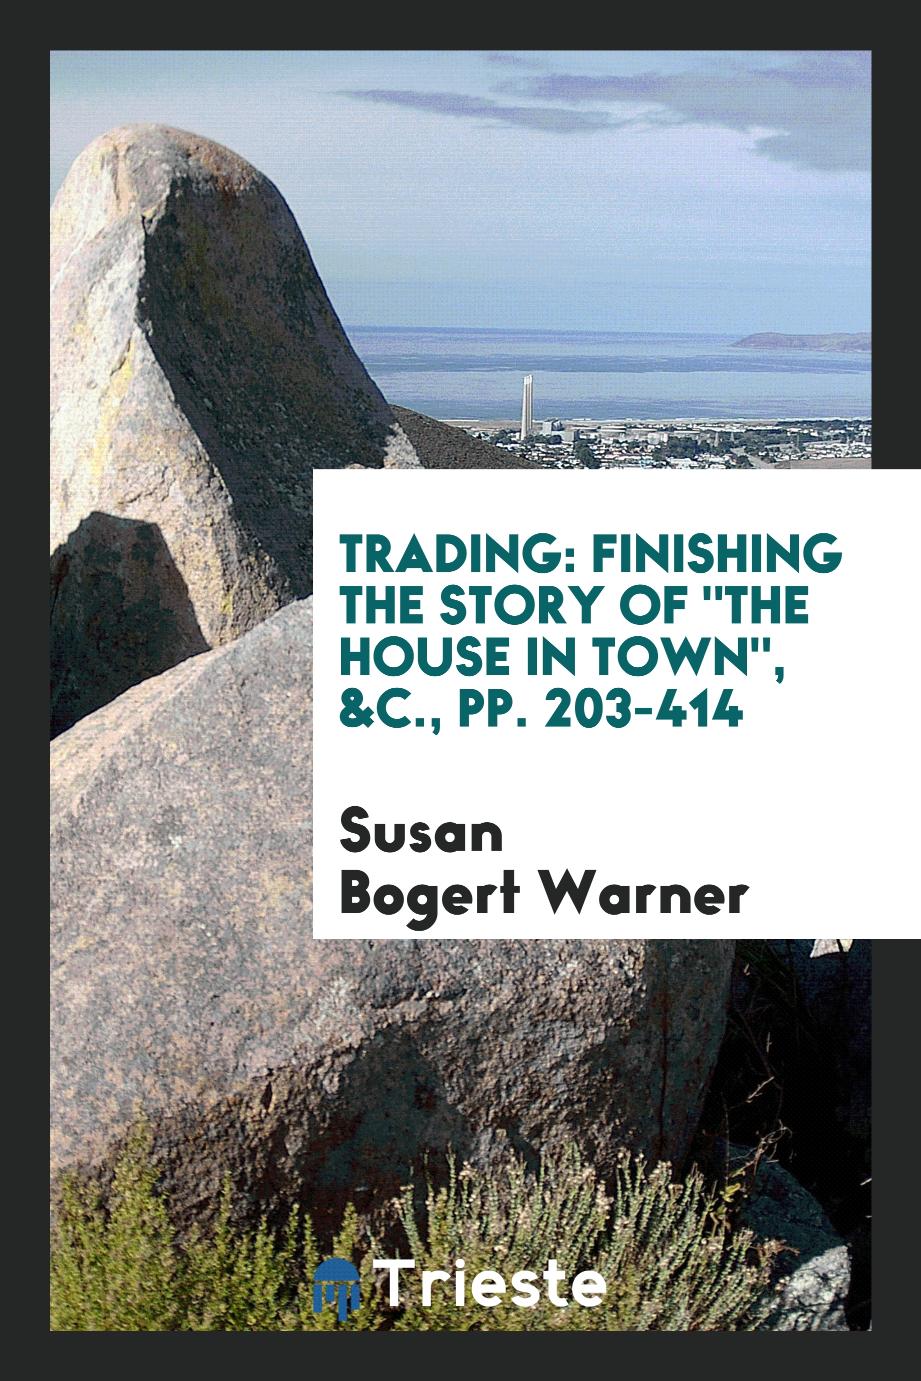 Trading: Finishing the Story Of "The House in Town", &C., pp. 203-414